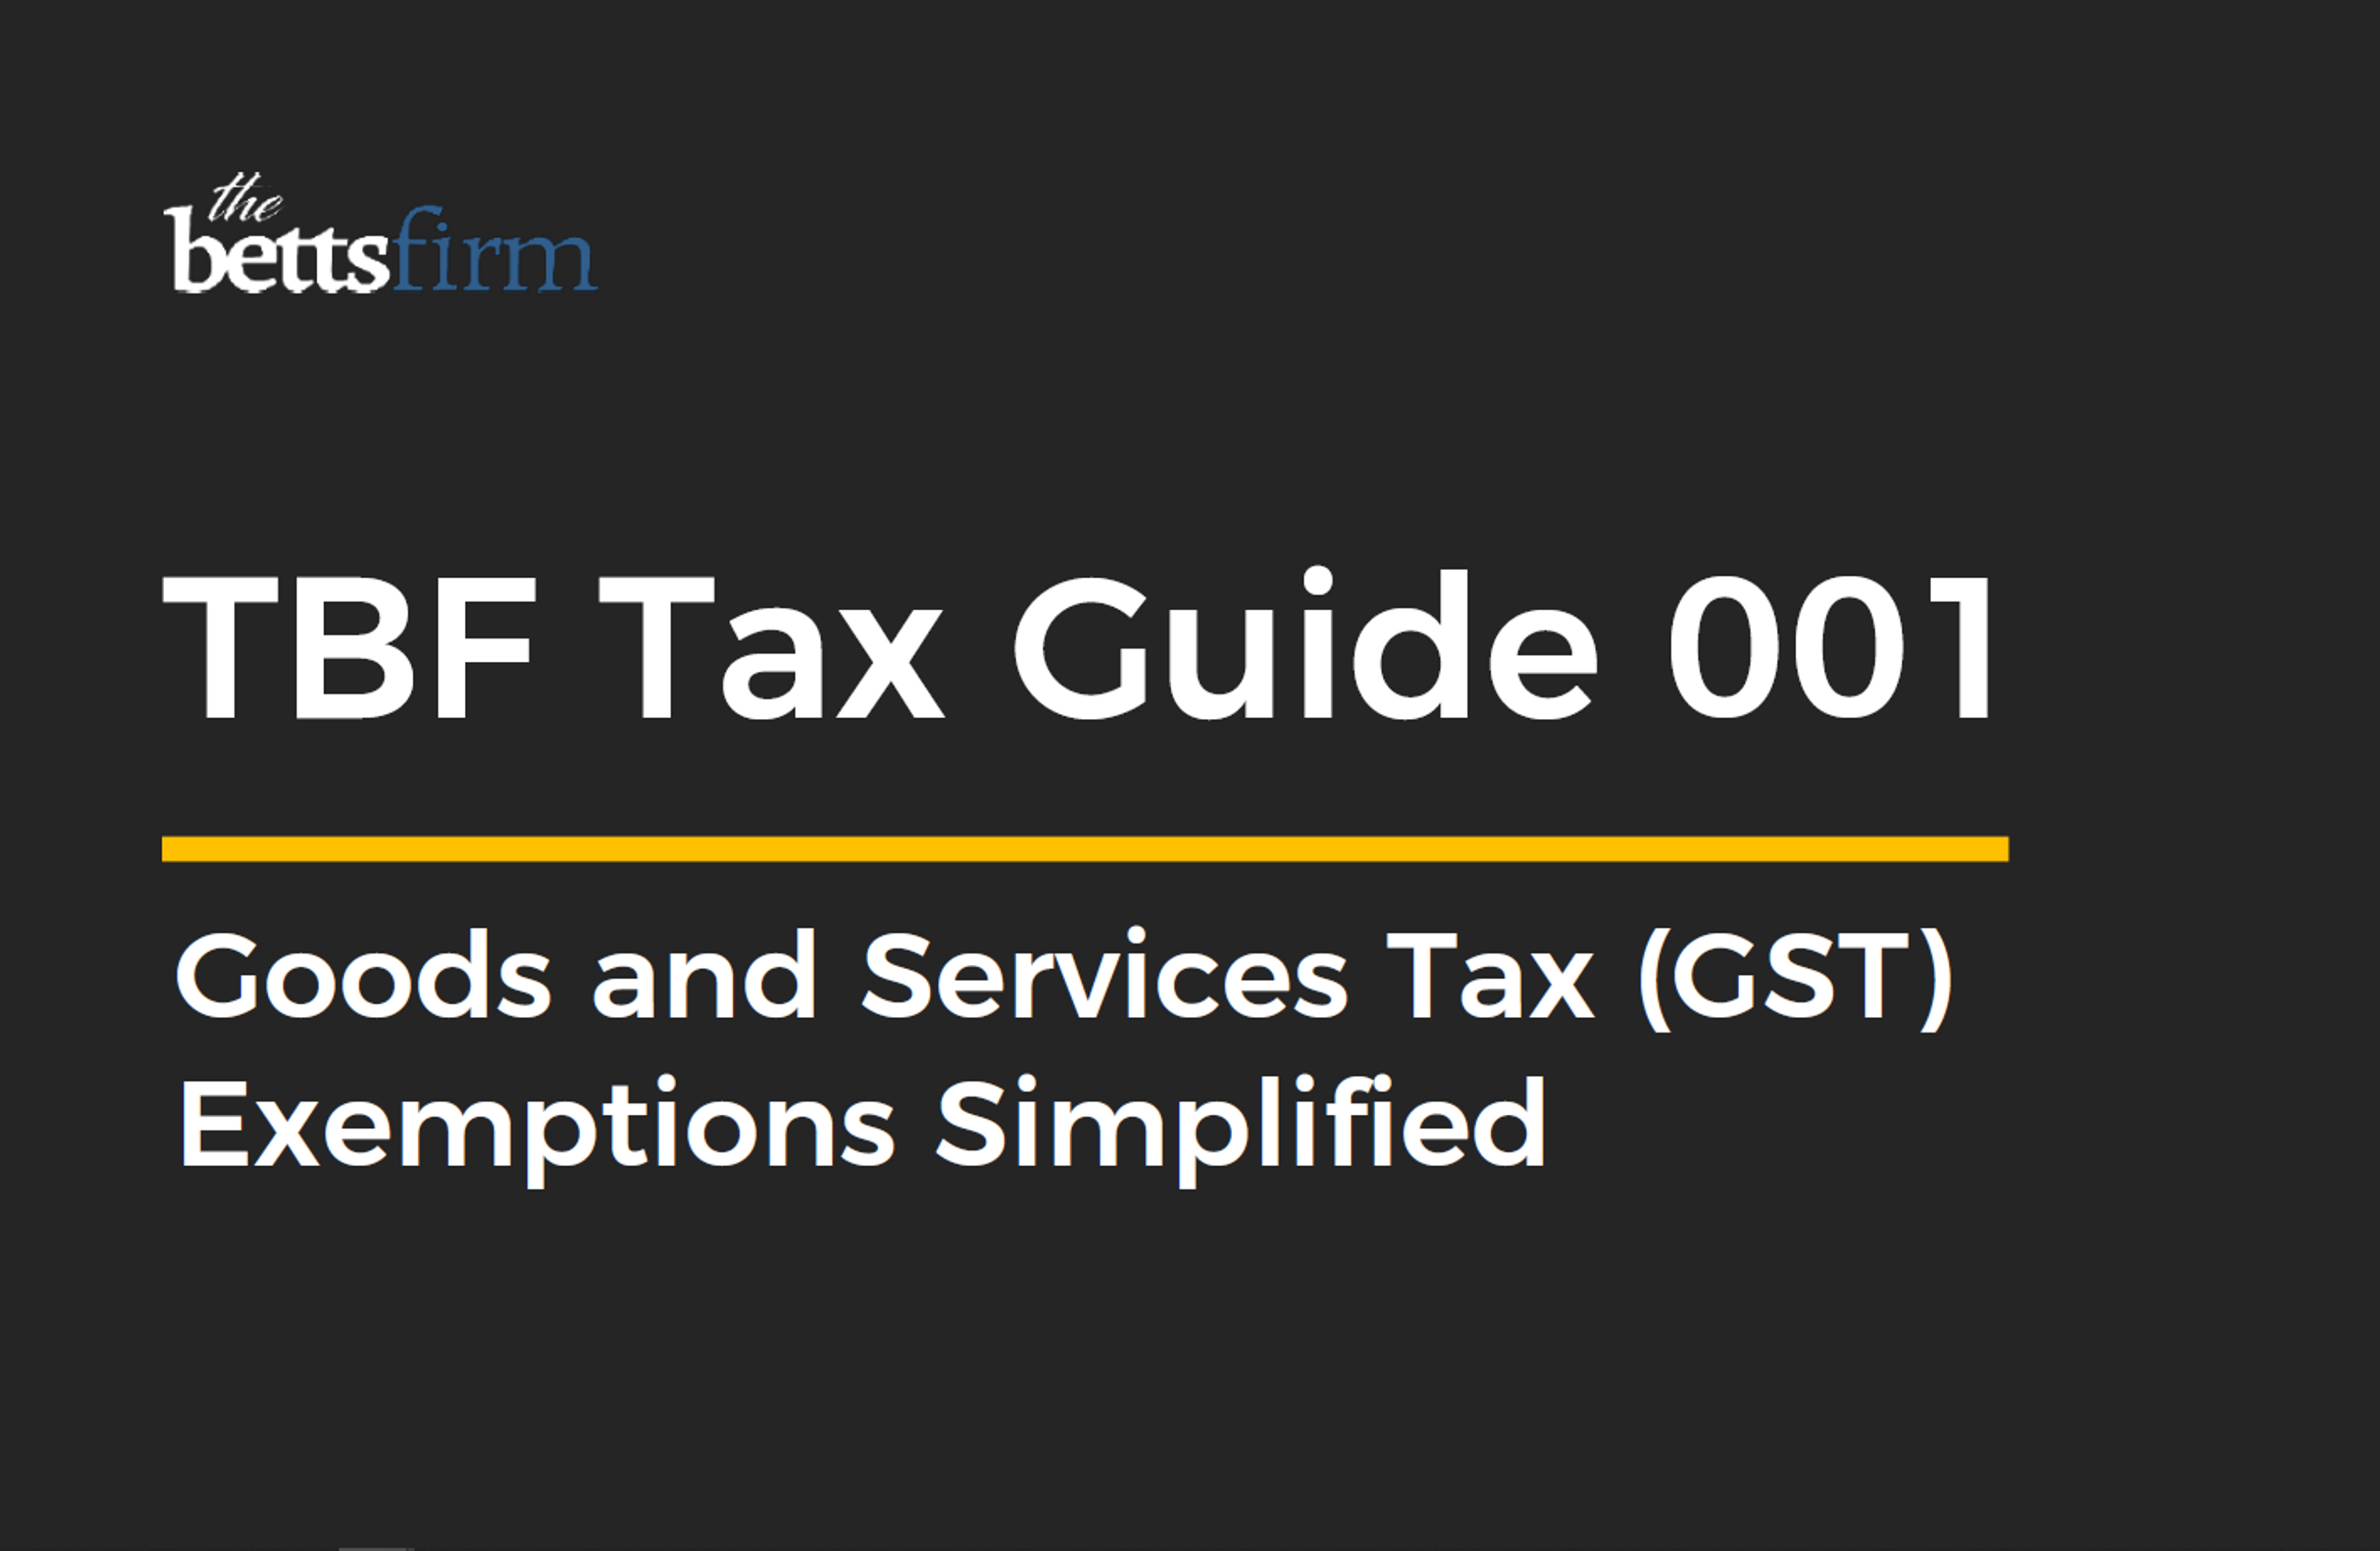 Goods and Services Tax (GST) Exemptions Simplified